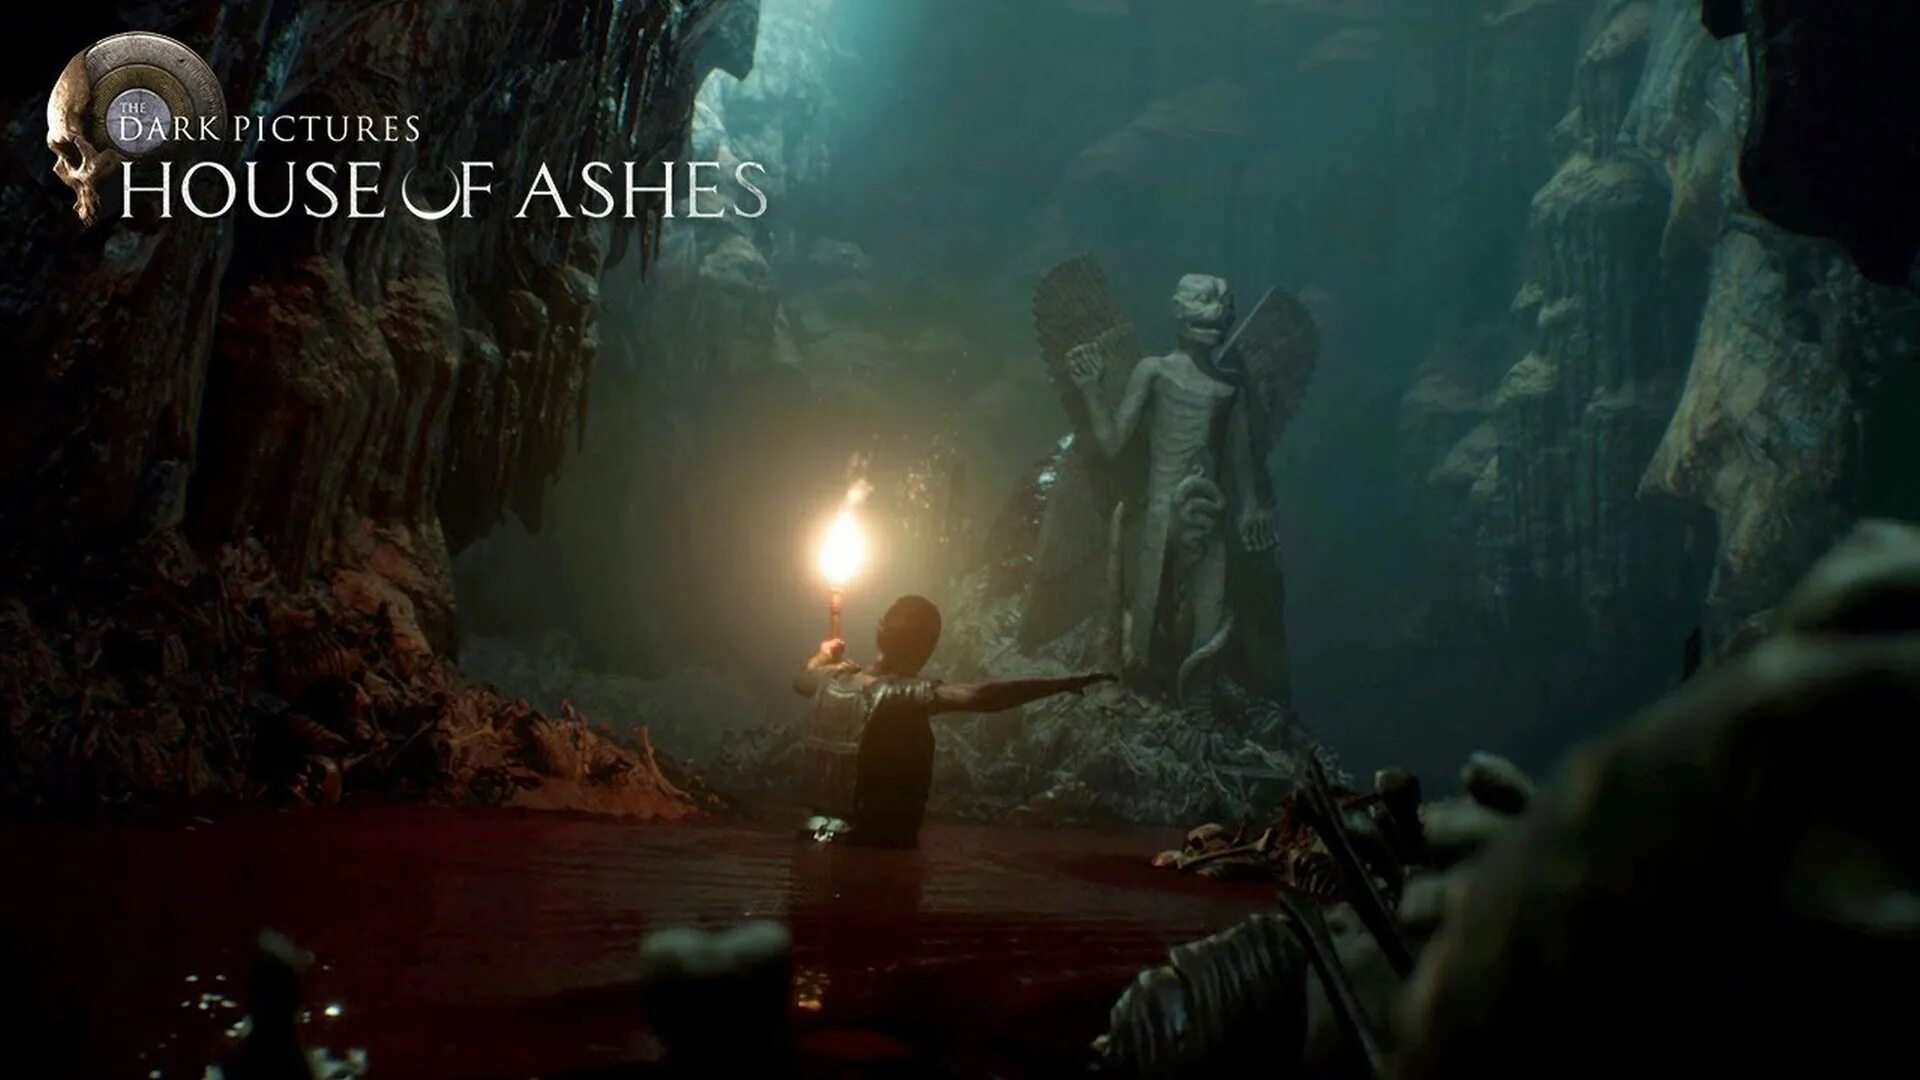 The Dark pictures Anthology: House of Ashes. House of Ashes ps4.